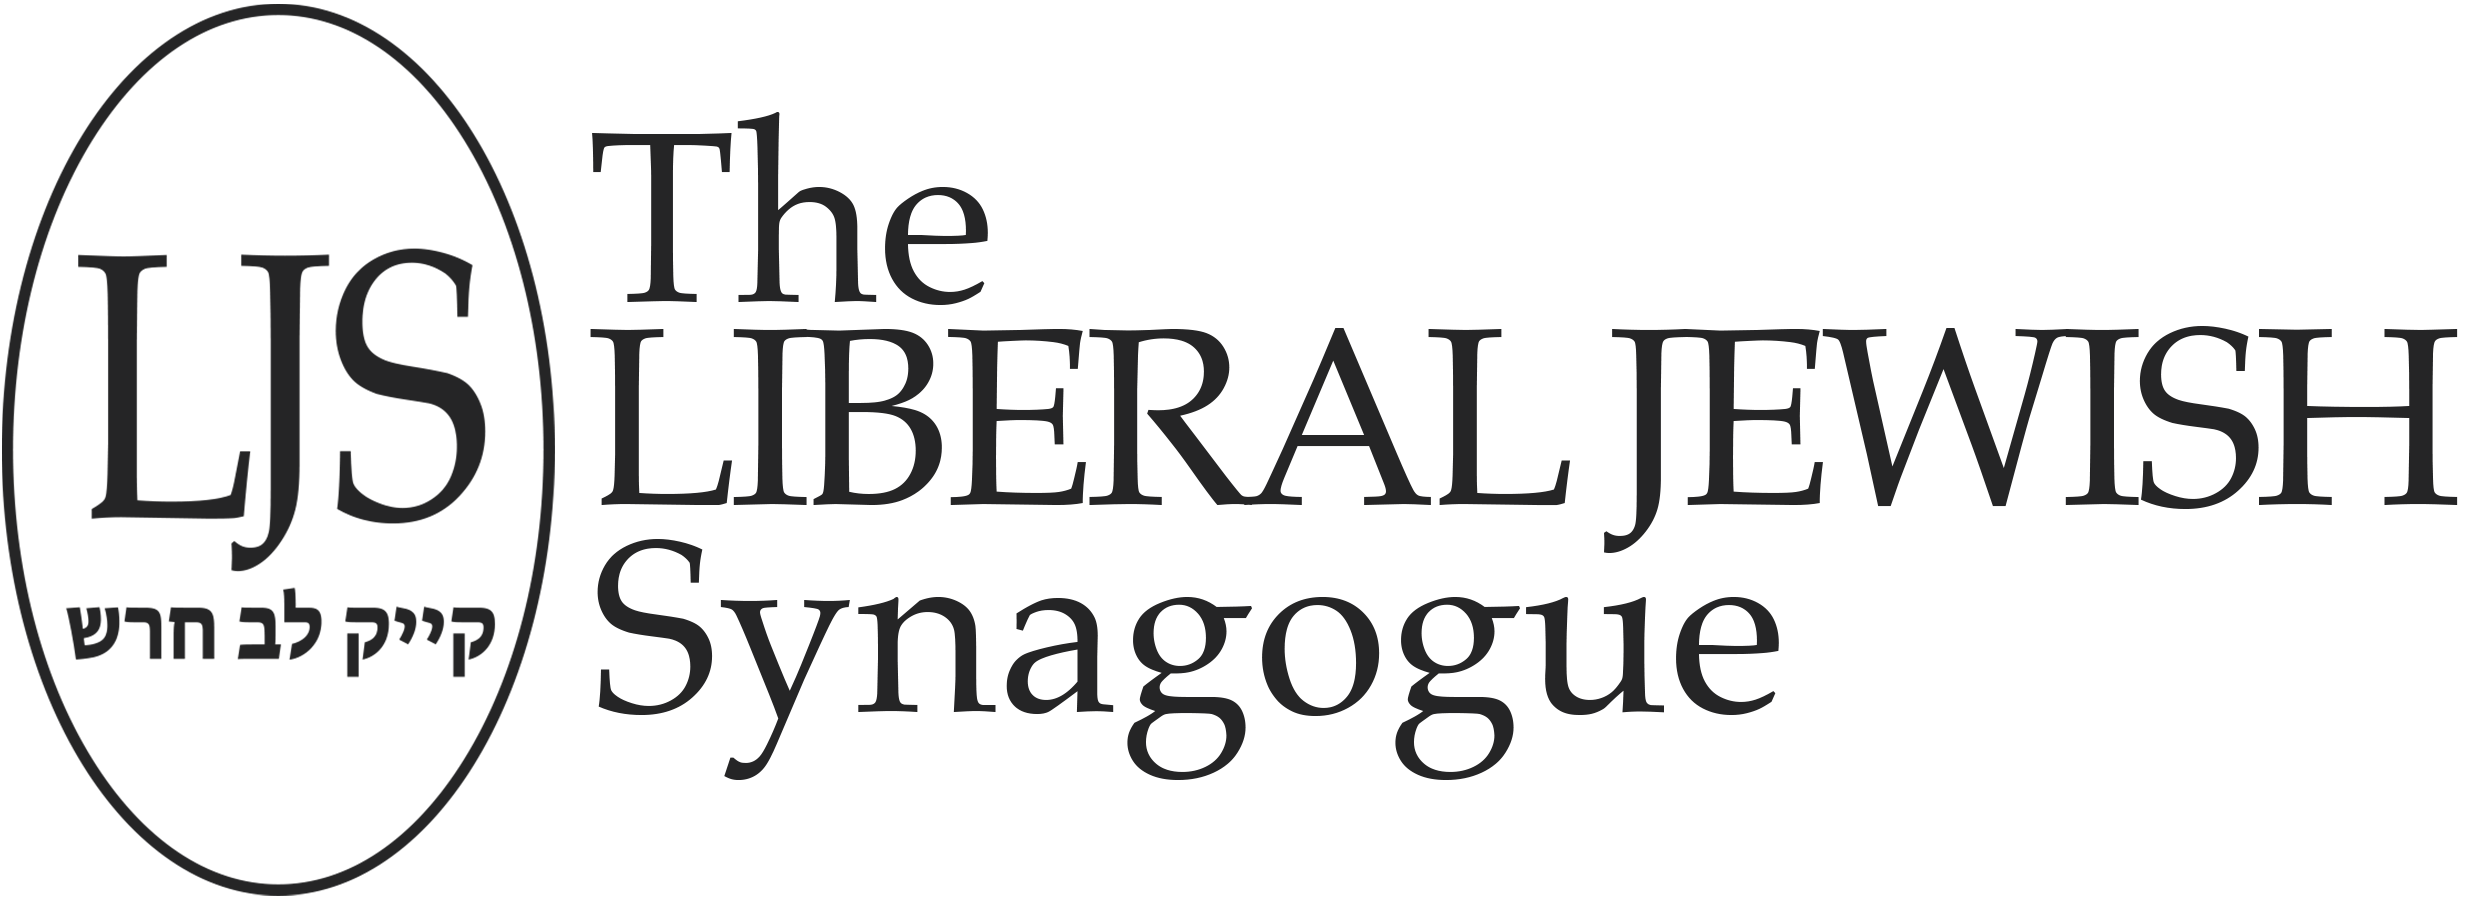 Synagogue Logo - The Liberal Jewish Synagogue – The oldest liberal synagogue in London.